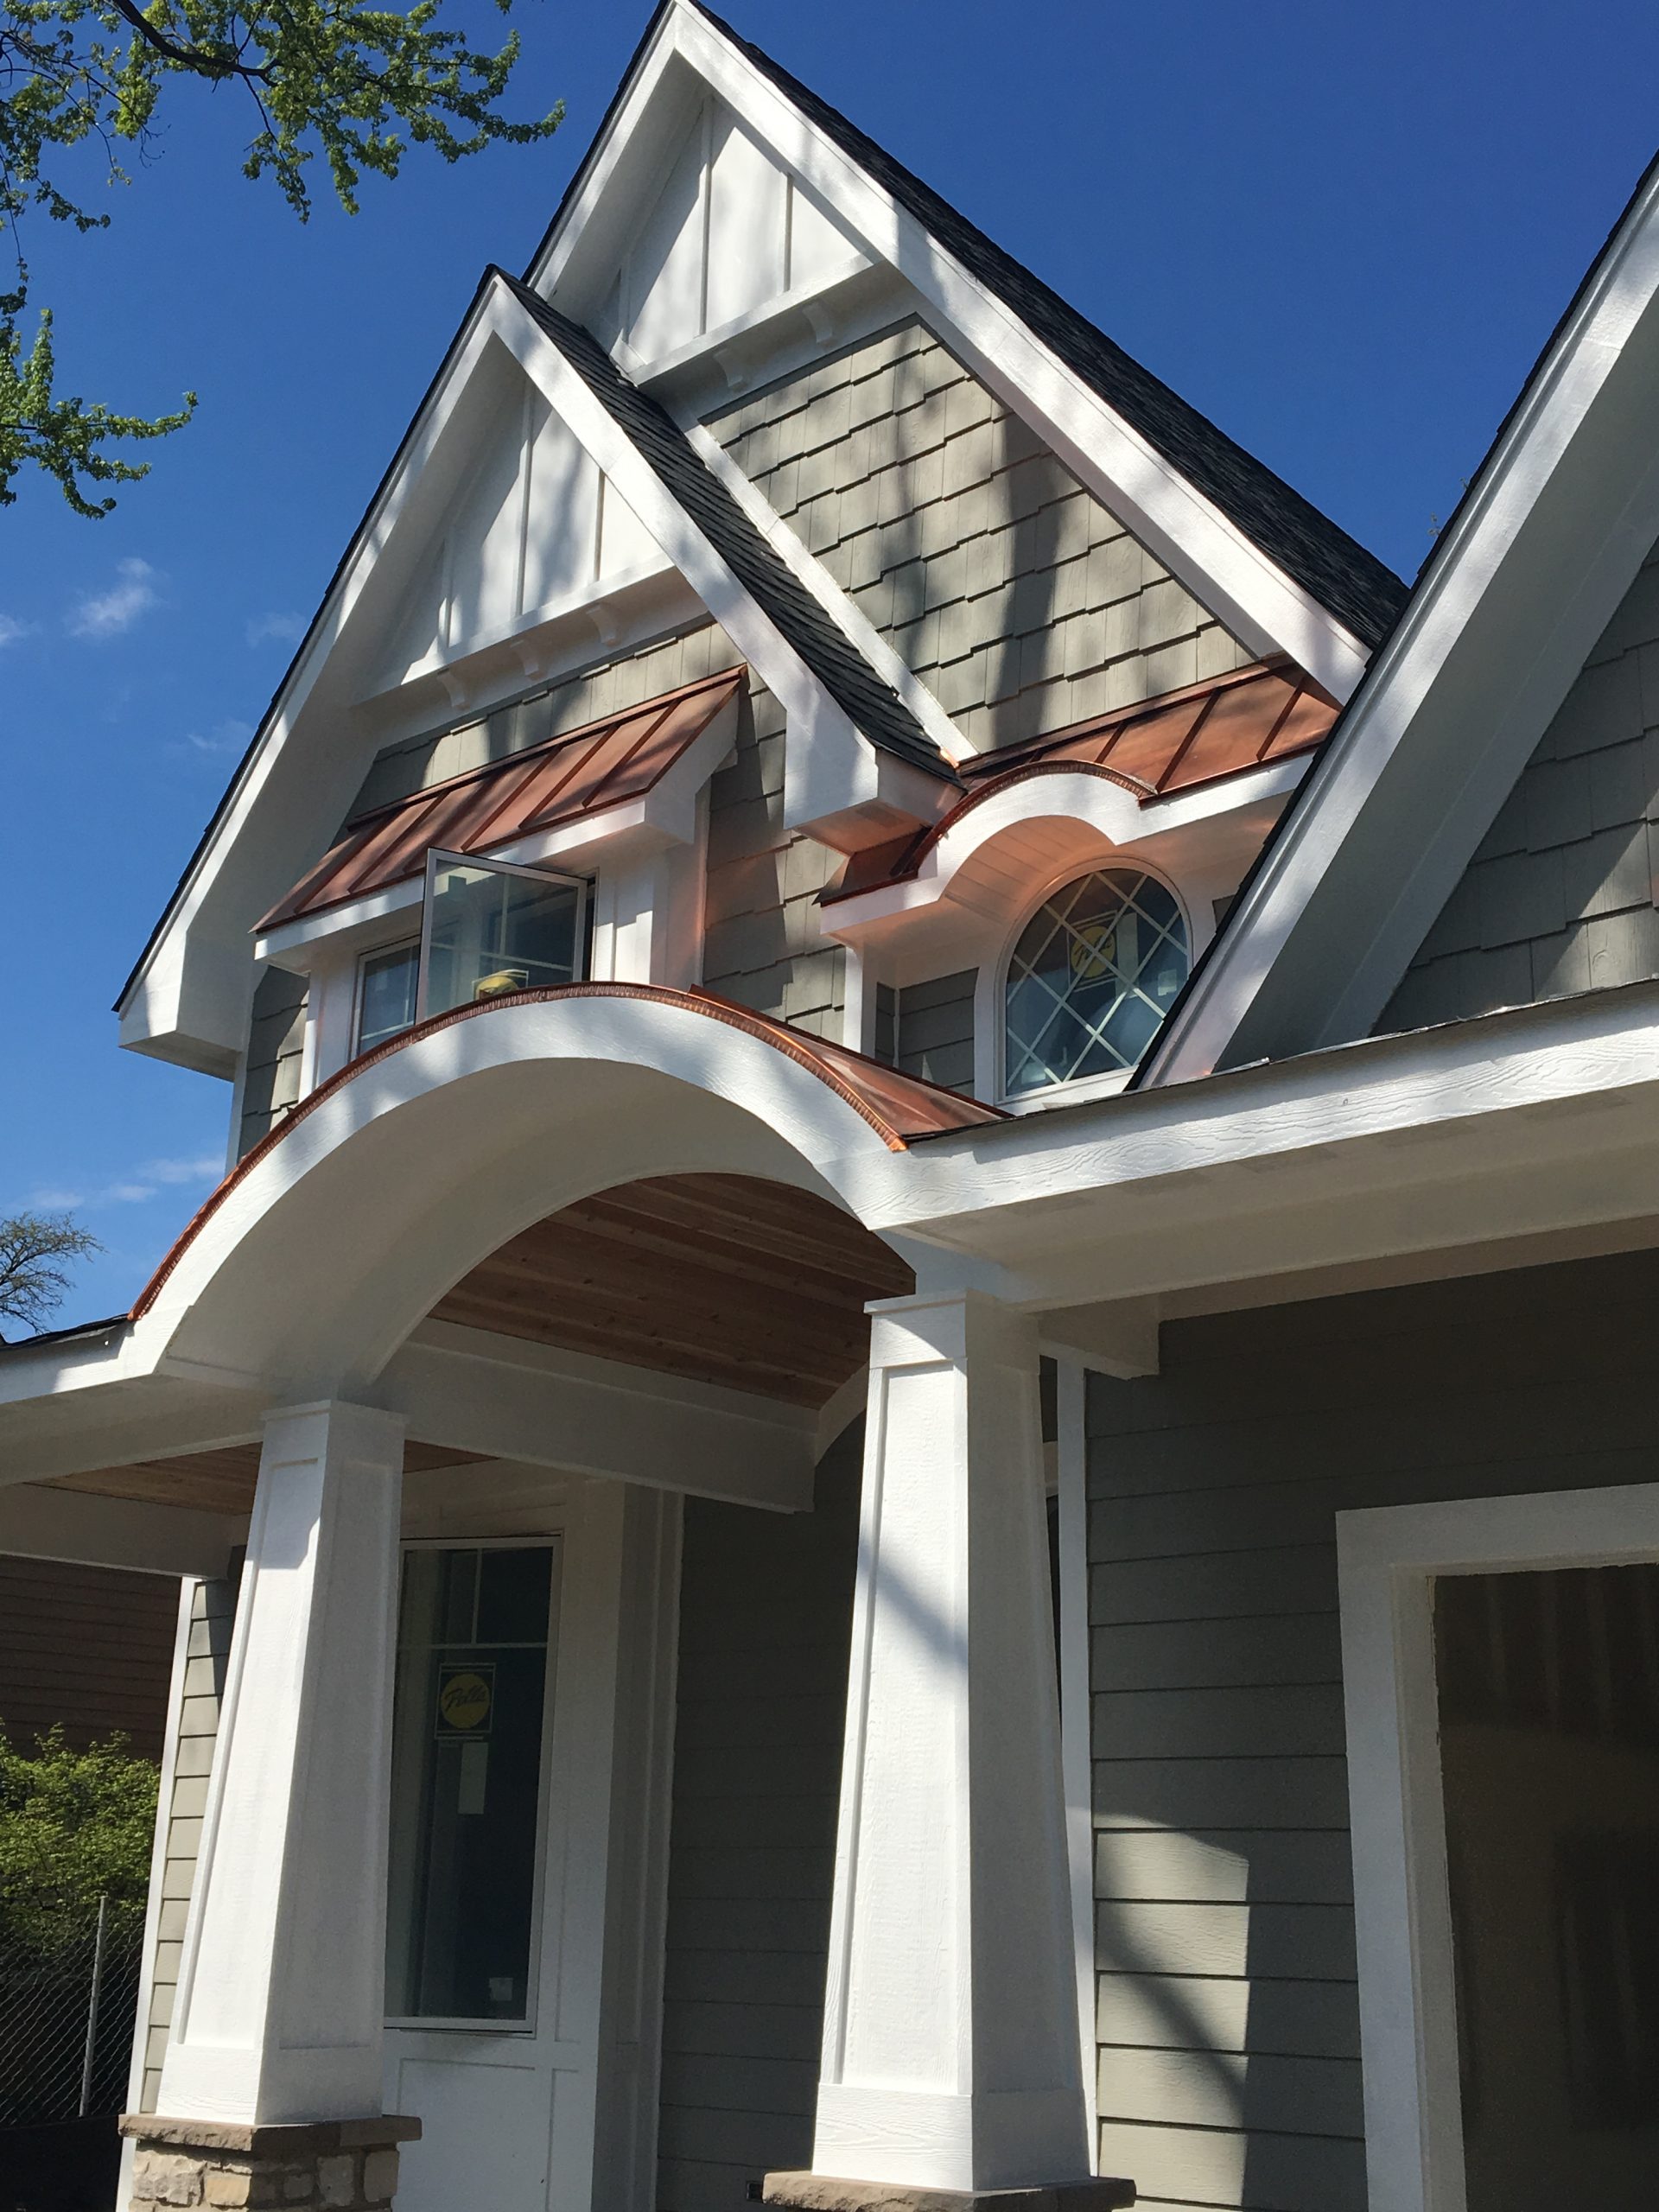 Gray siding colors with white trim. Brown metal roofing. Arched porch with tapered columns. Brown stone veneer.